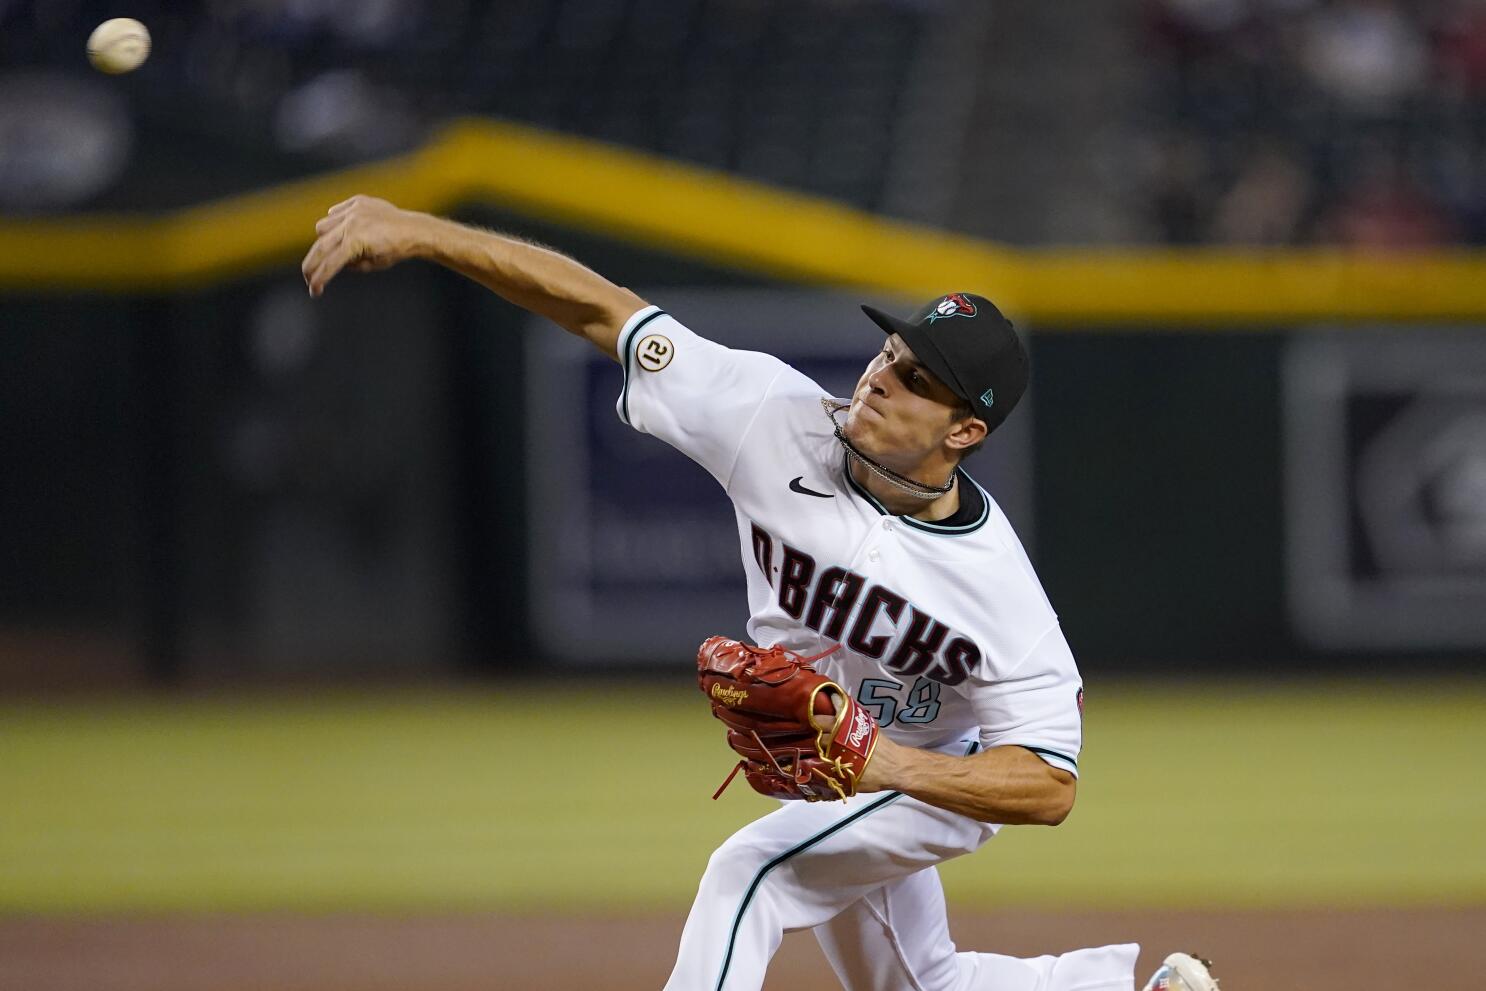 D-backs aim to extend road streak at Brewers' expense